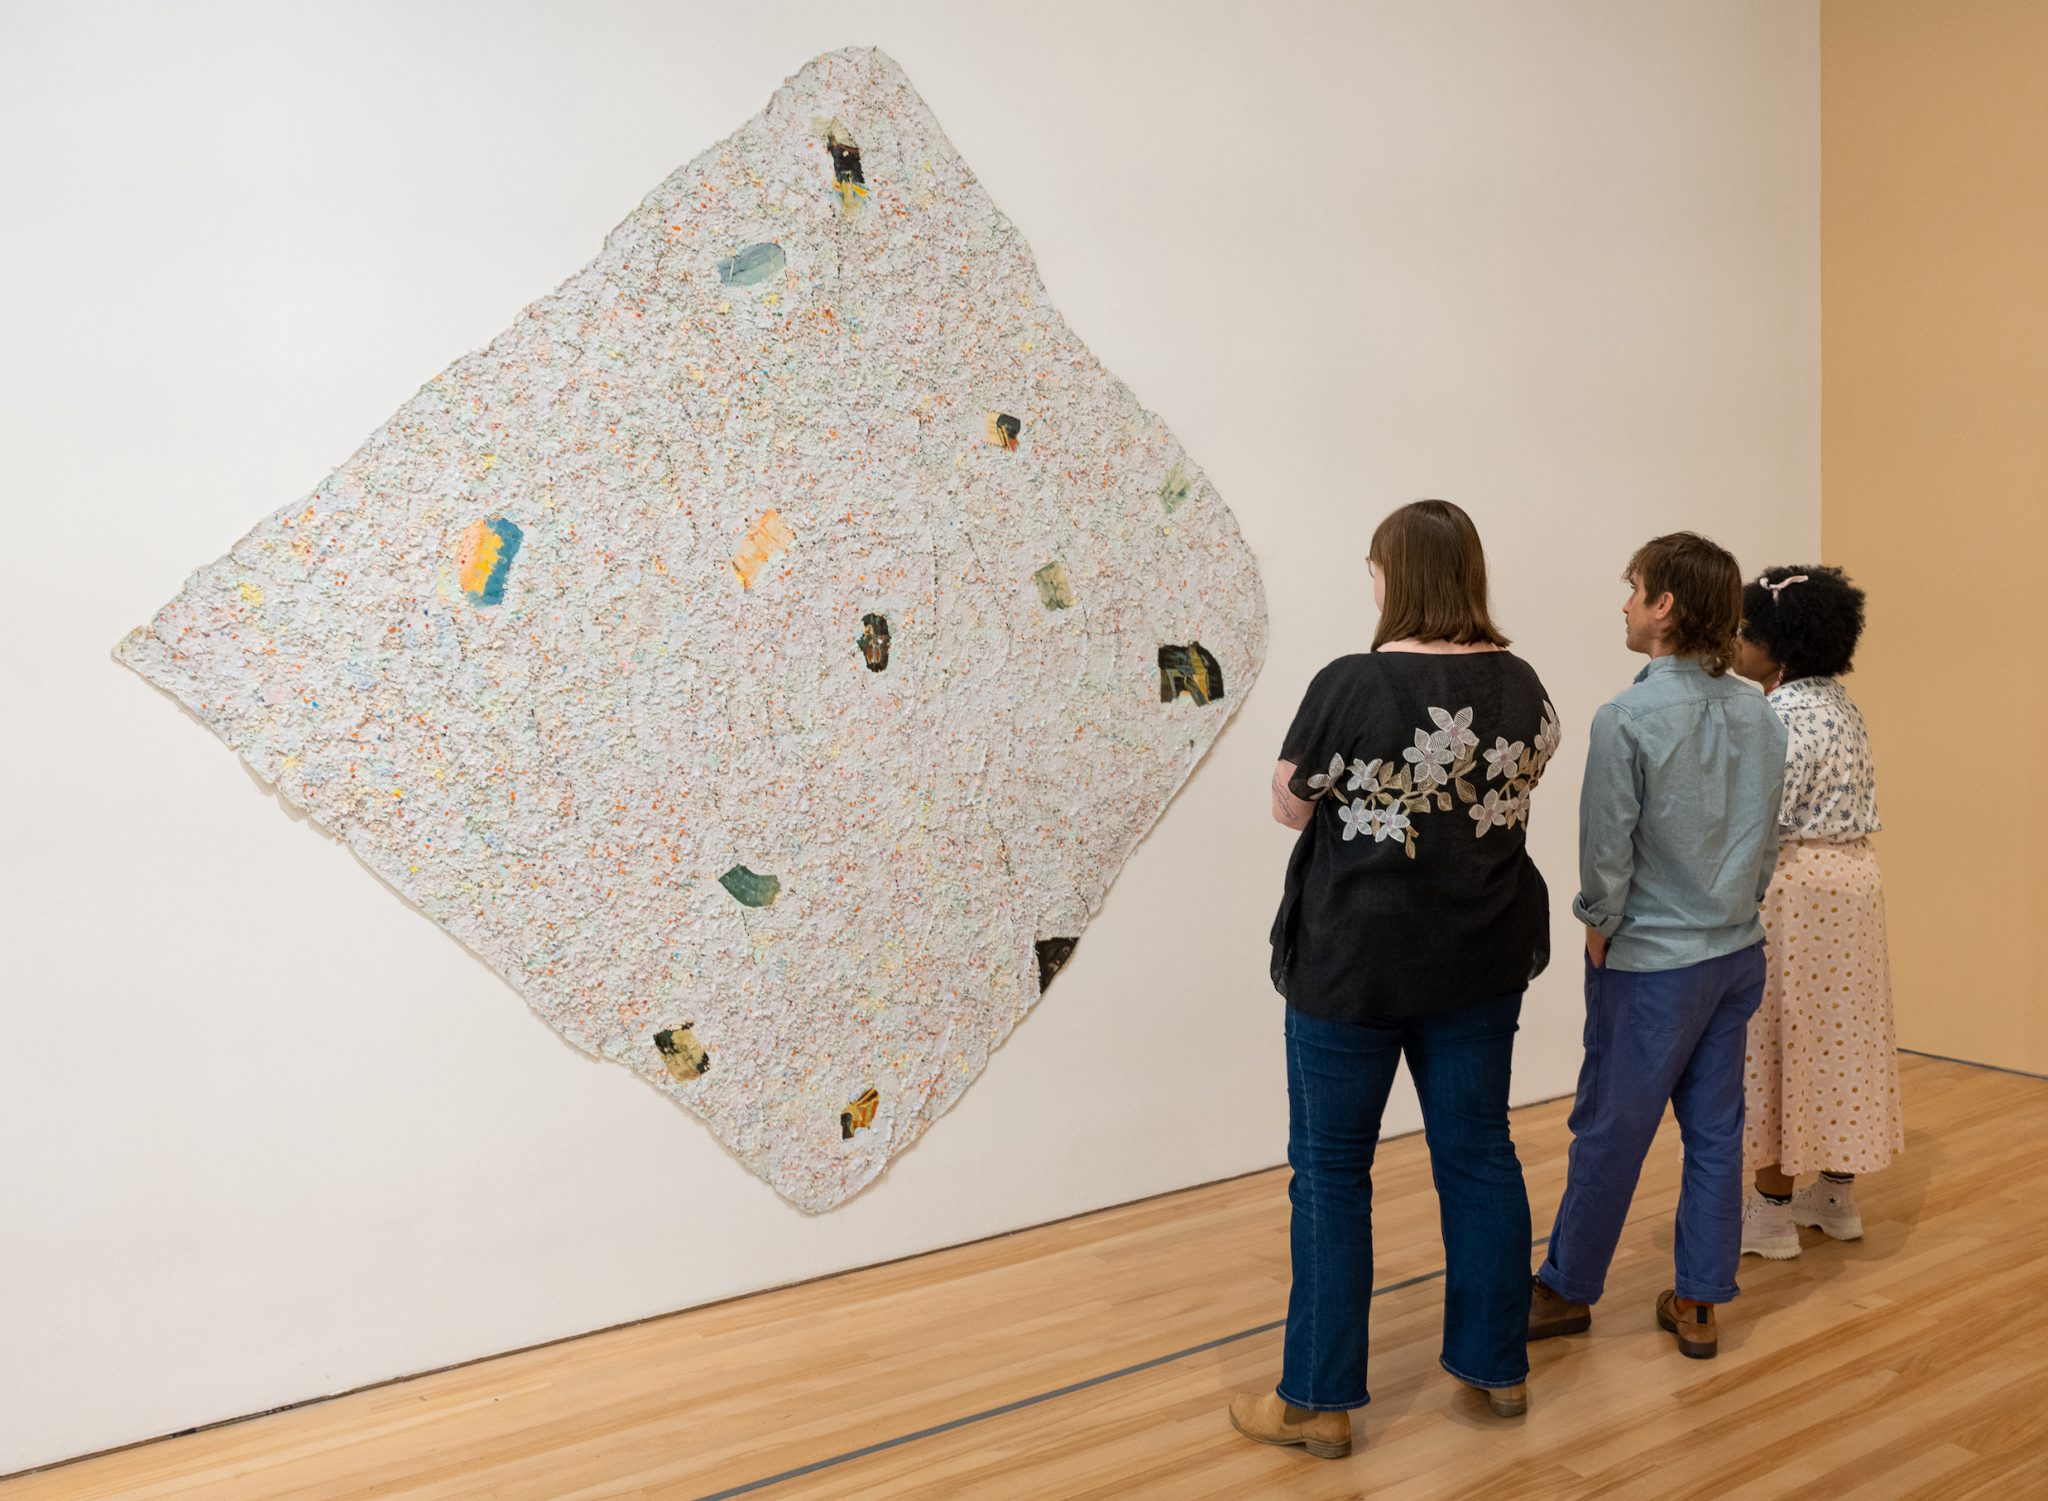 3 people standing in front of a large abstract artwork with lots of punched paper holes over the canvas